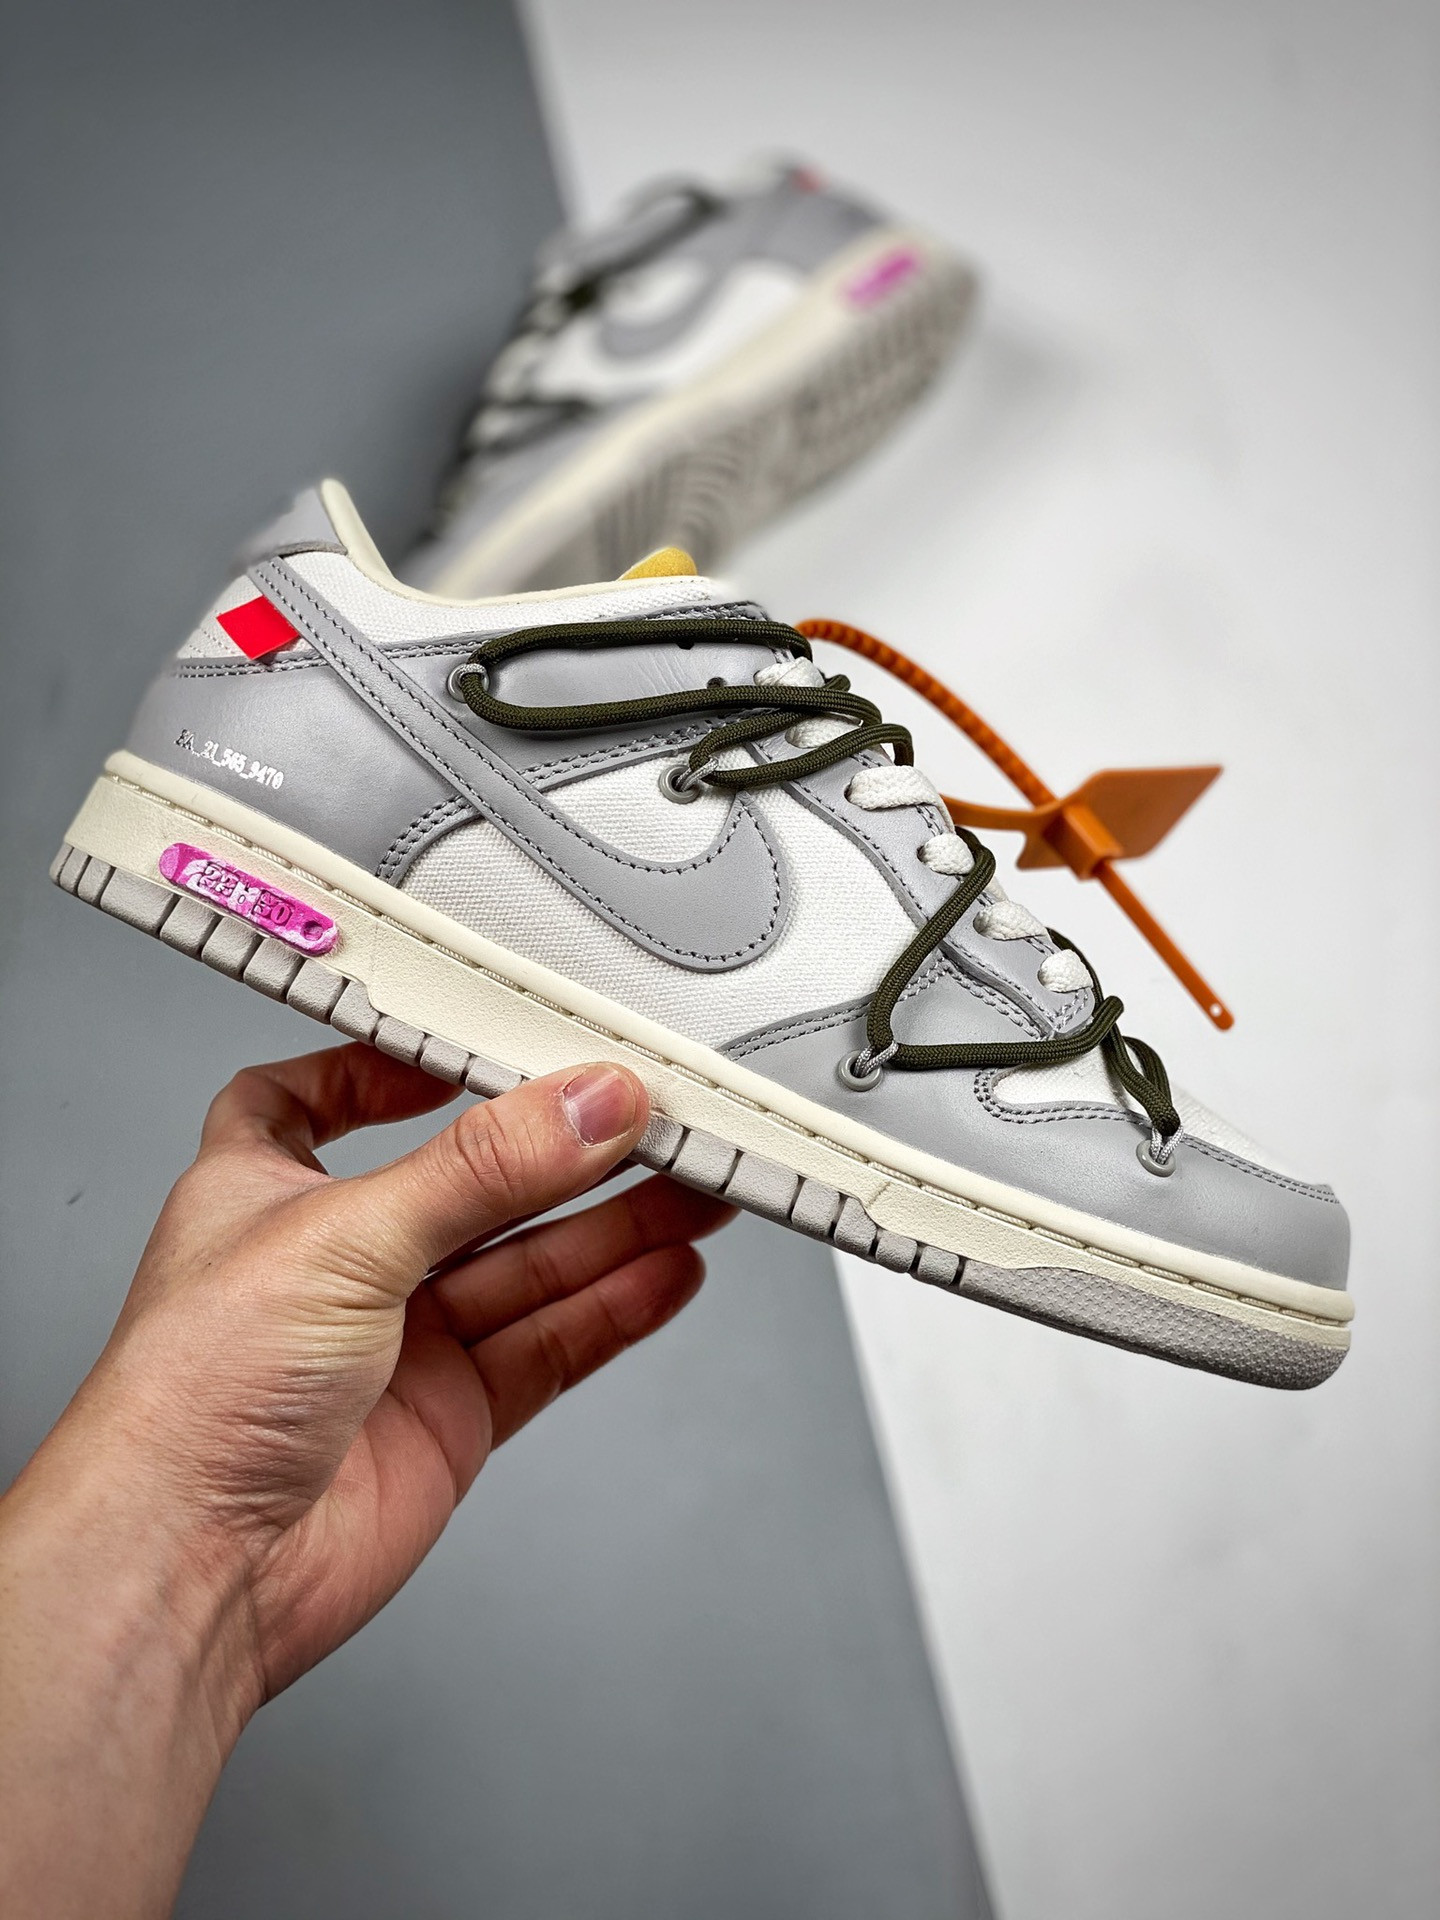 Off-White x Nike Dunk Low 9 of 50 Sail Neutral Grey For Sale